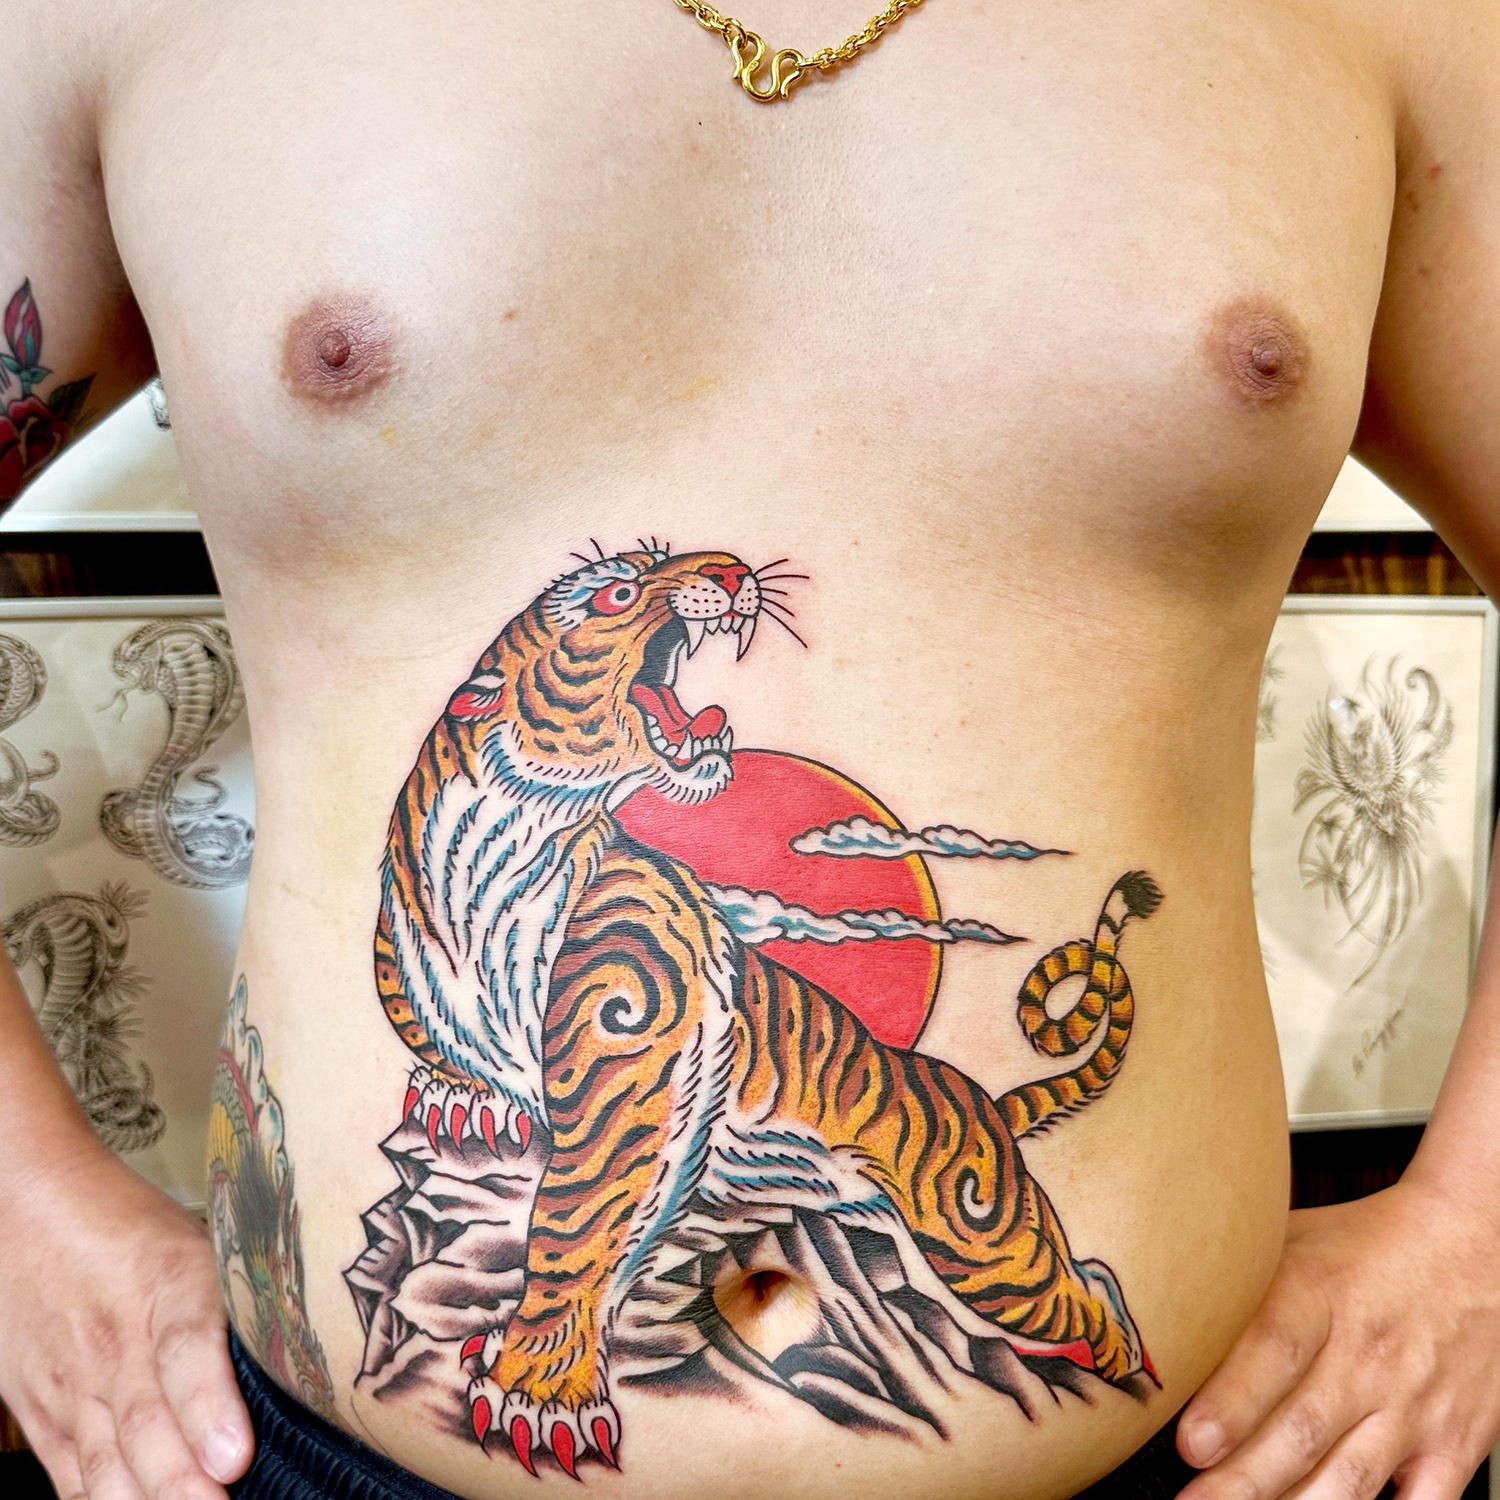 tiger and sun, color tattoo by jimmy shy on stomach